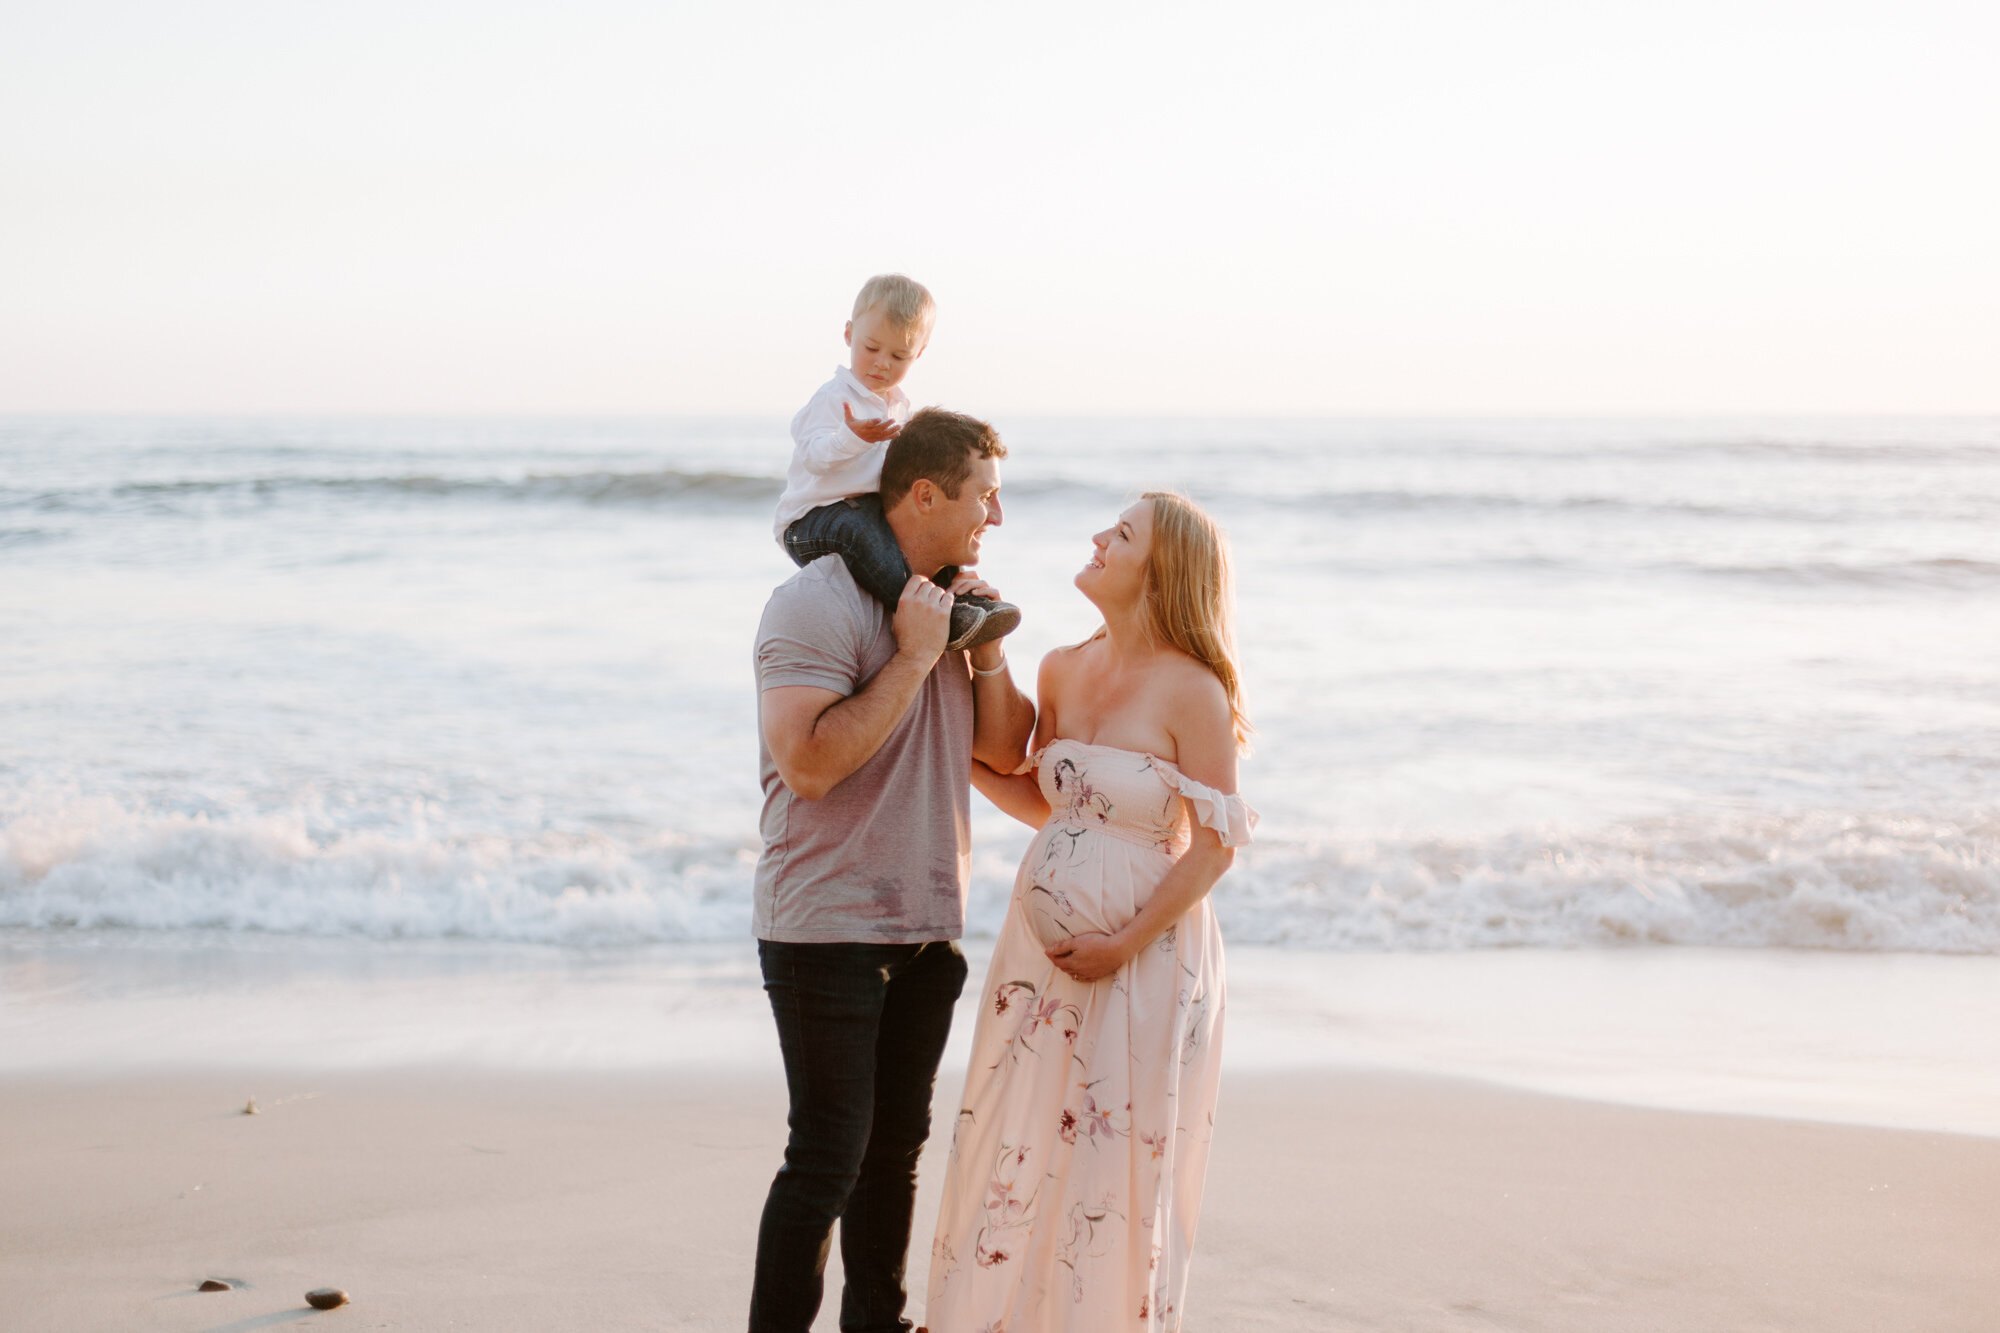 Carlsbad Bluff Maternity and Family Photo Session, San Diego. Family photography and maternity photography. Family photographer and maternity photographer. San Diego family photographer, san diego